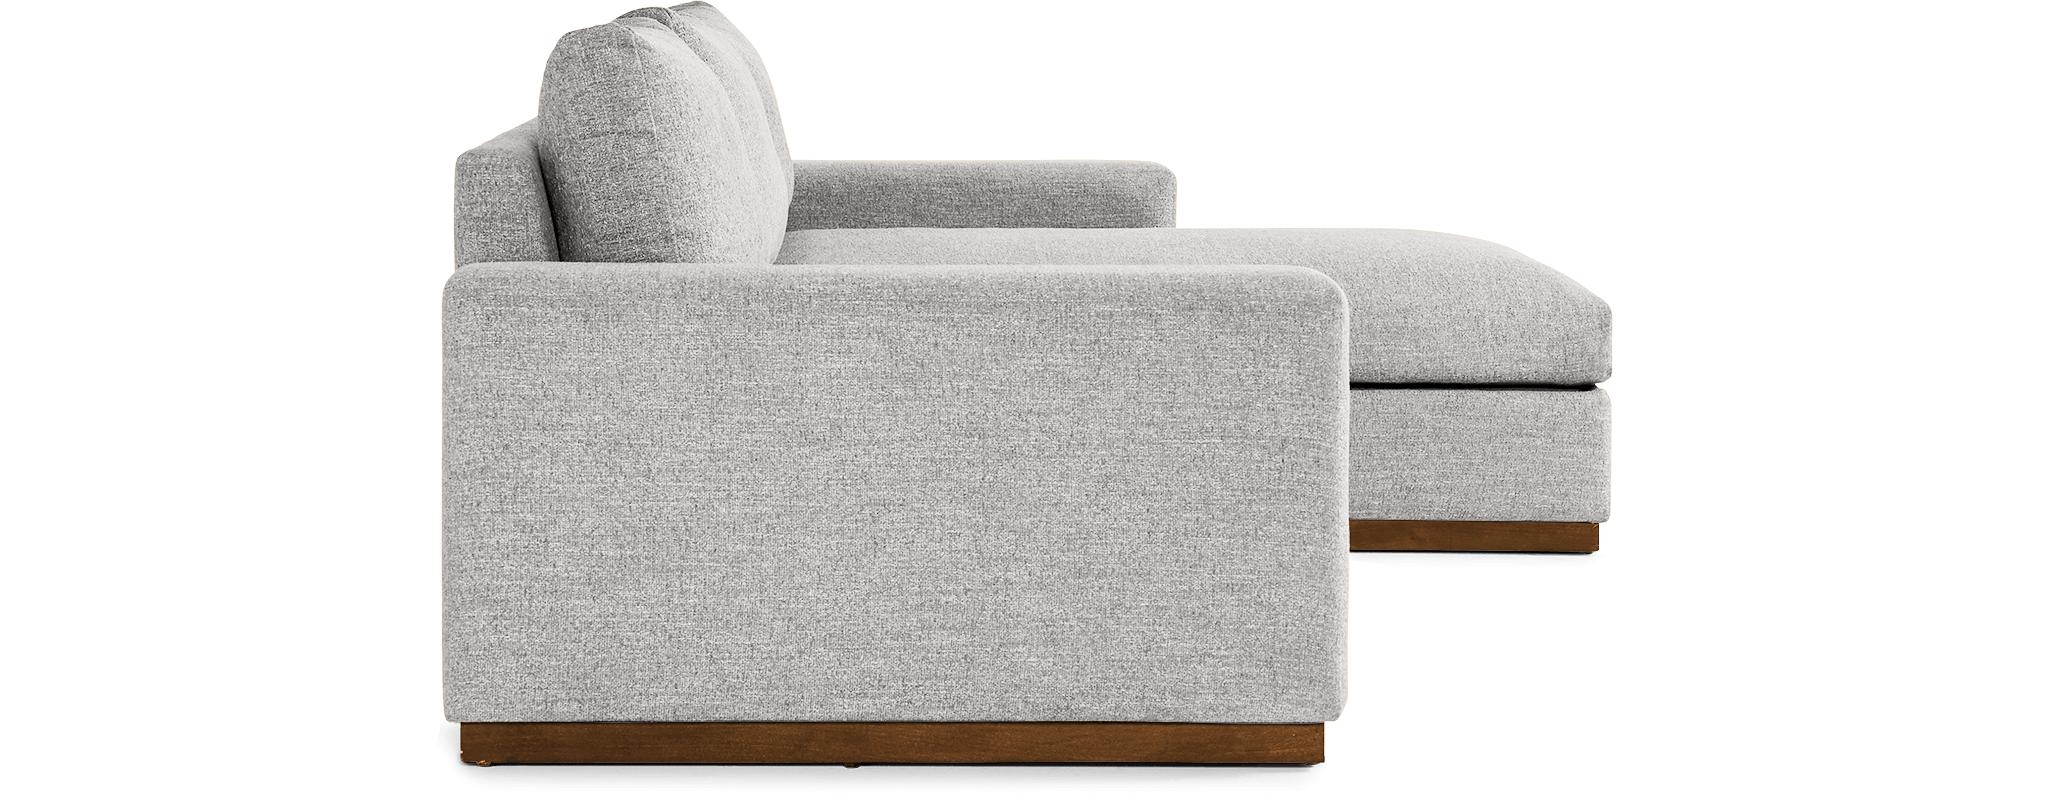 Holt Sectional with Storage - Milo Dove - Image 2